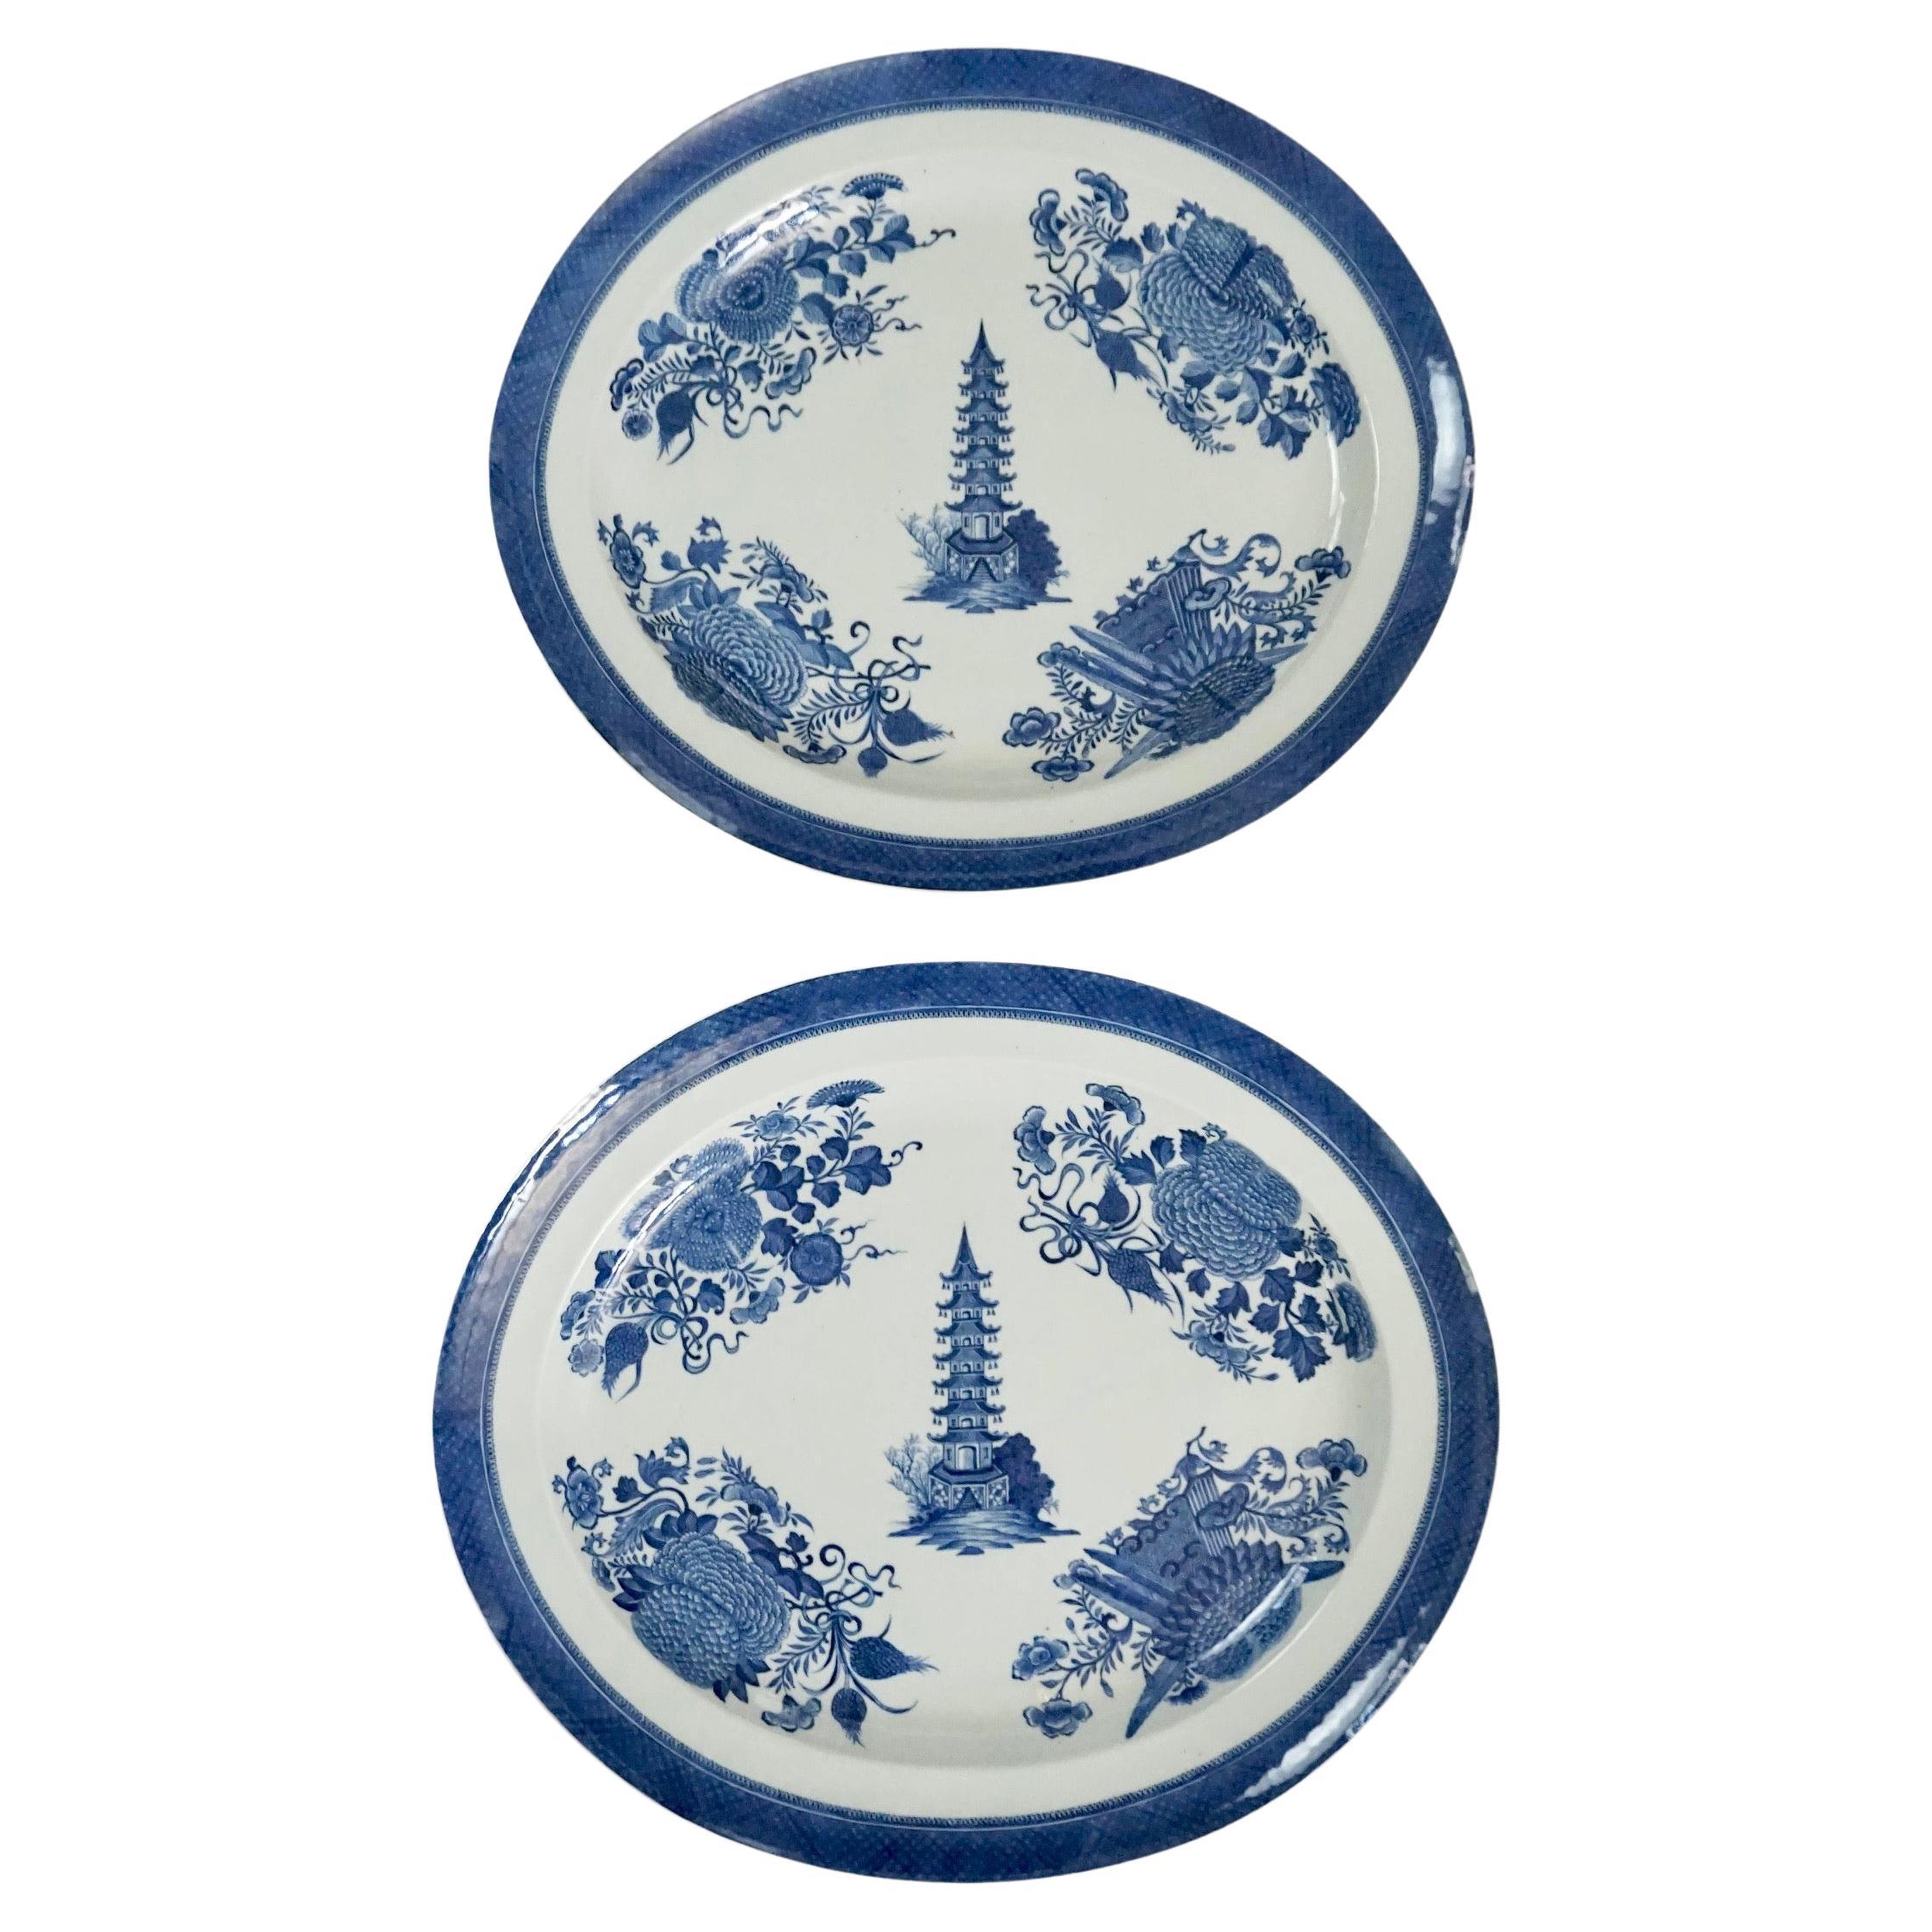 Chinese Export 'Blue Fitzhugh' Platters from the Cabot-Perkins Service, c. 1812 For Sale